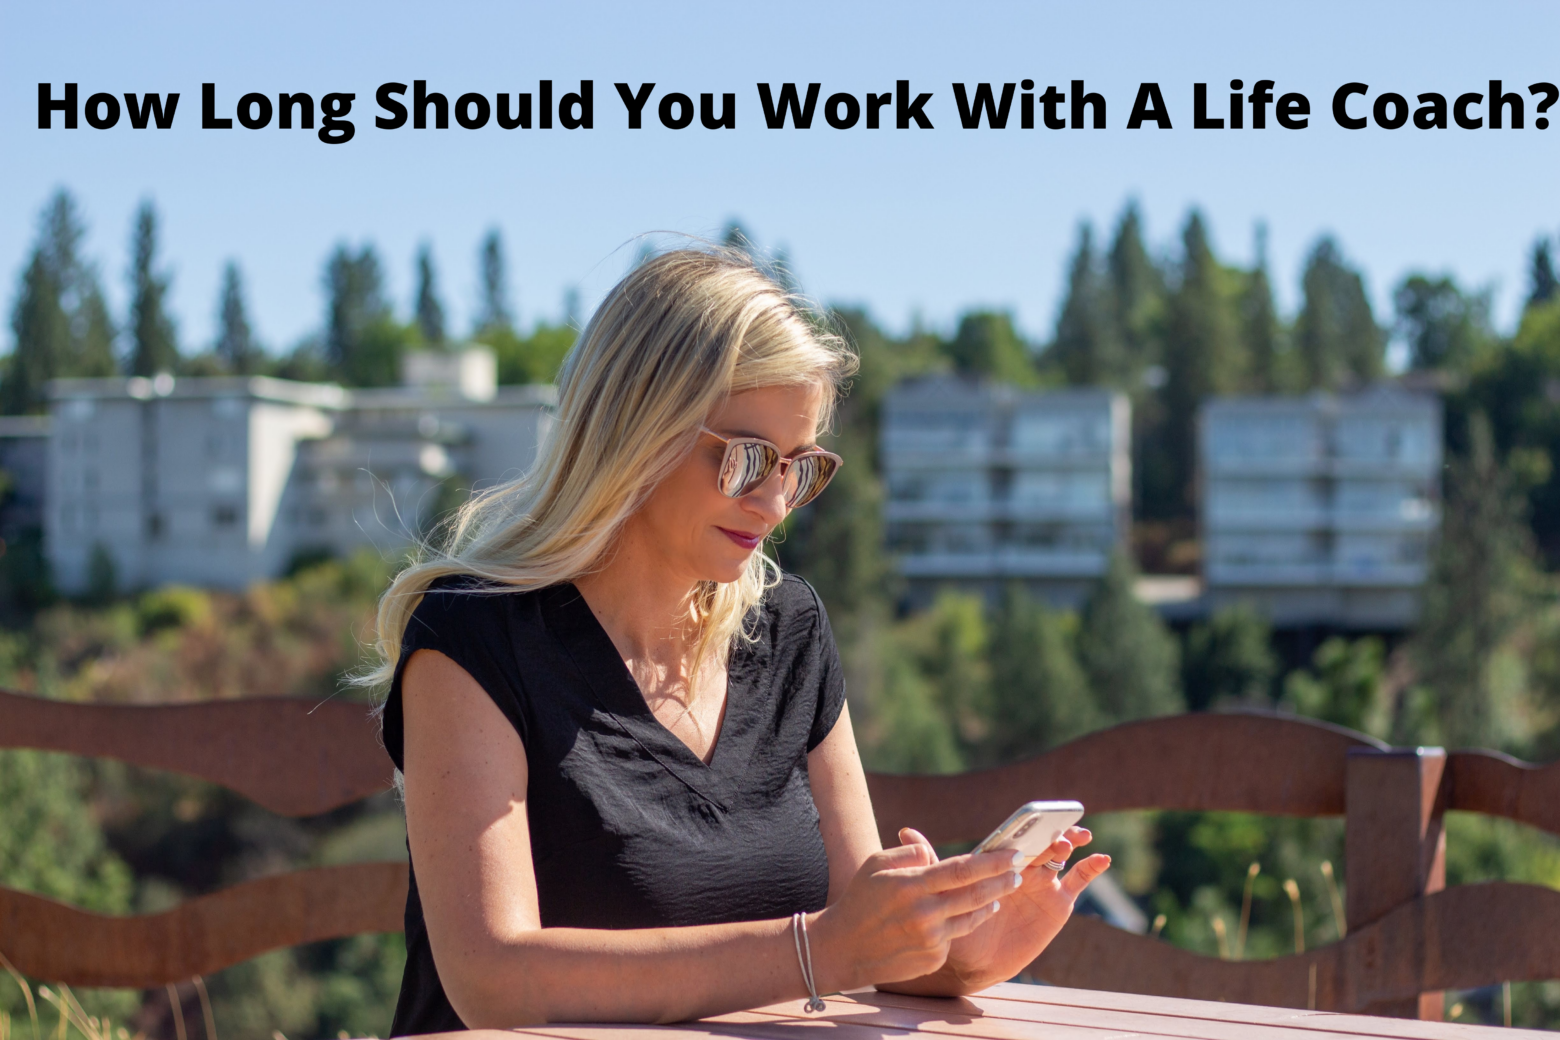 How Long Should You Work With A Life Coach?